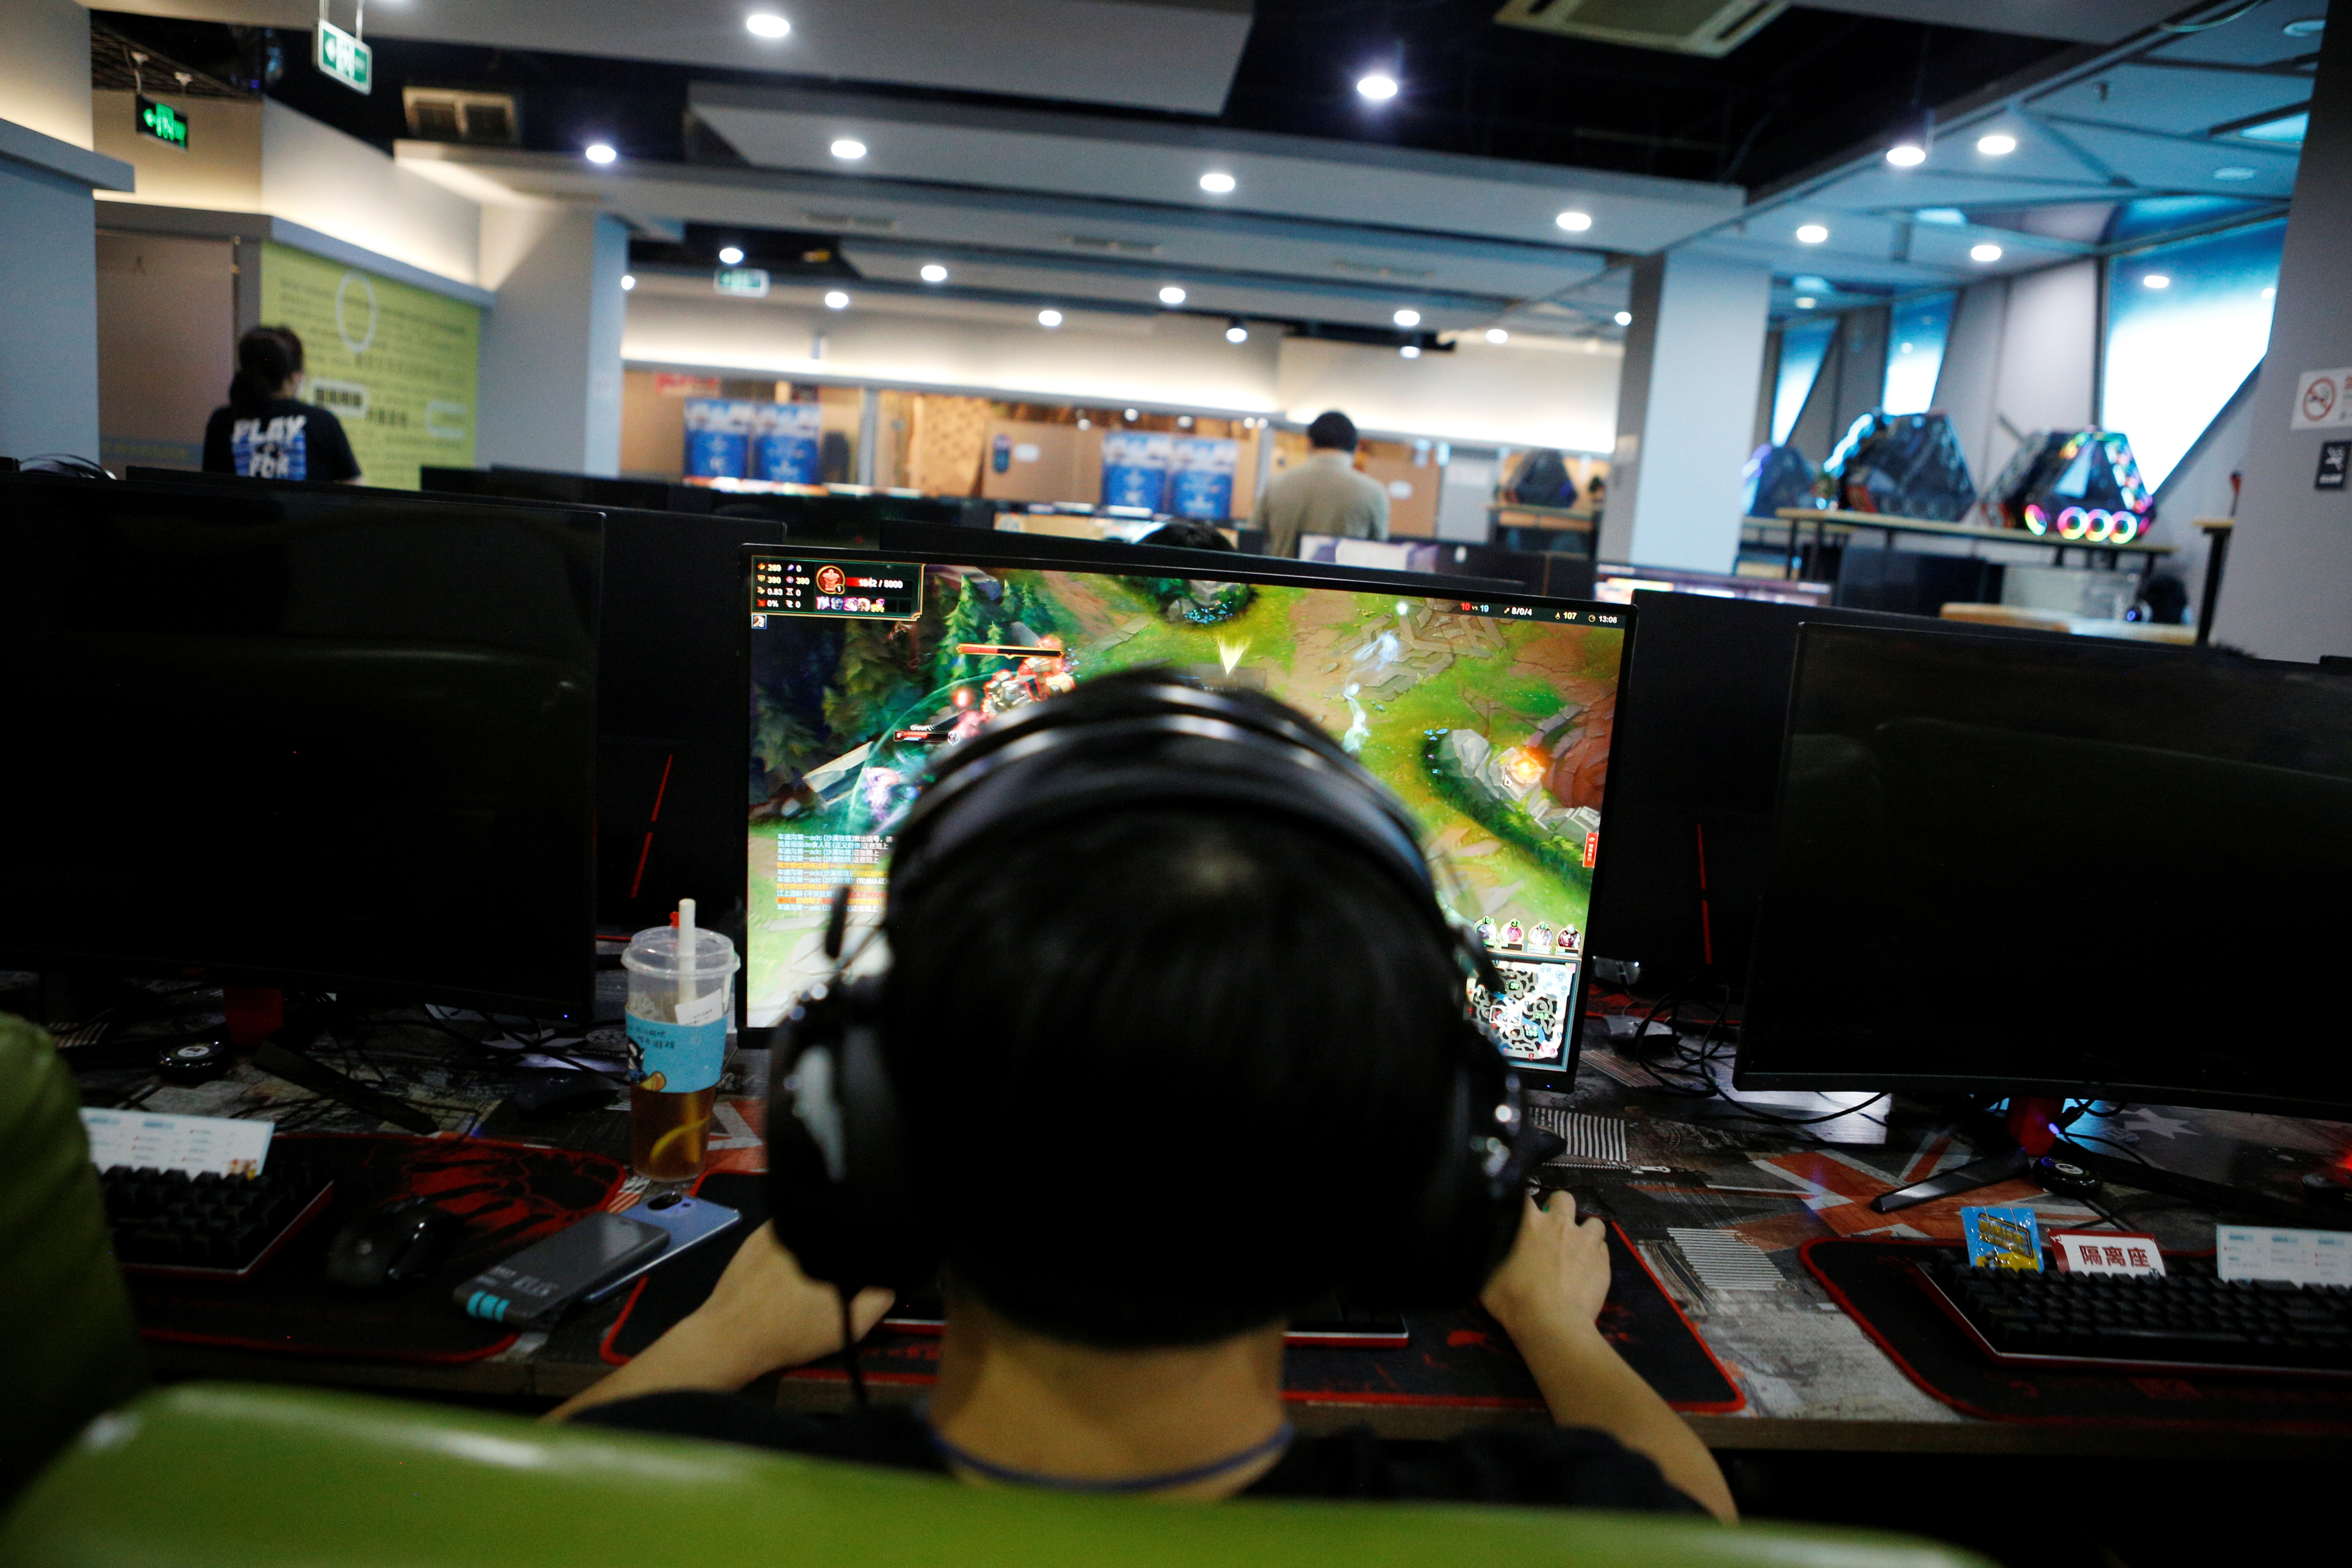 Hounded at home, China's video game firms welcomed in Europe